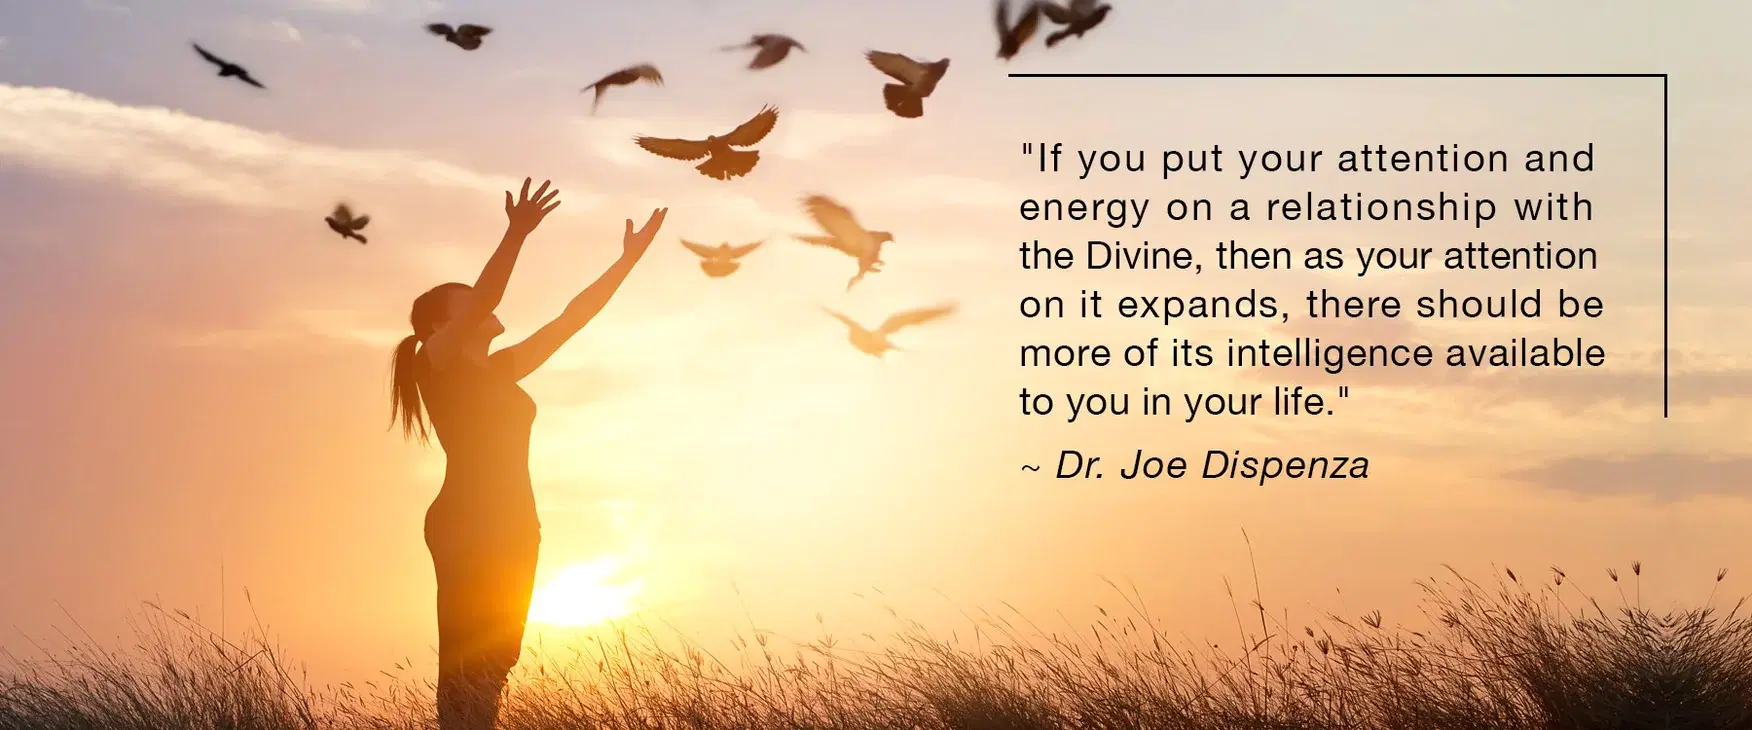 Developing a Personal Relationship with the Divine